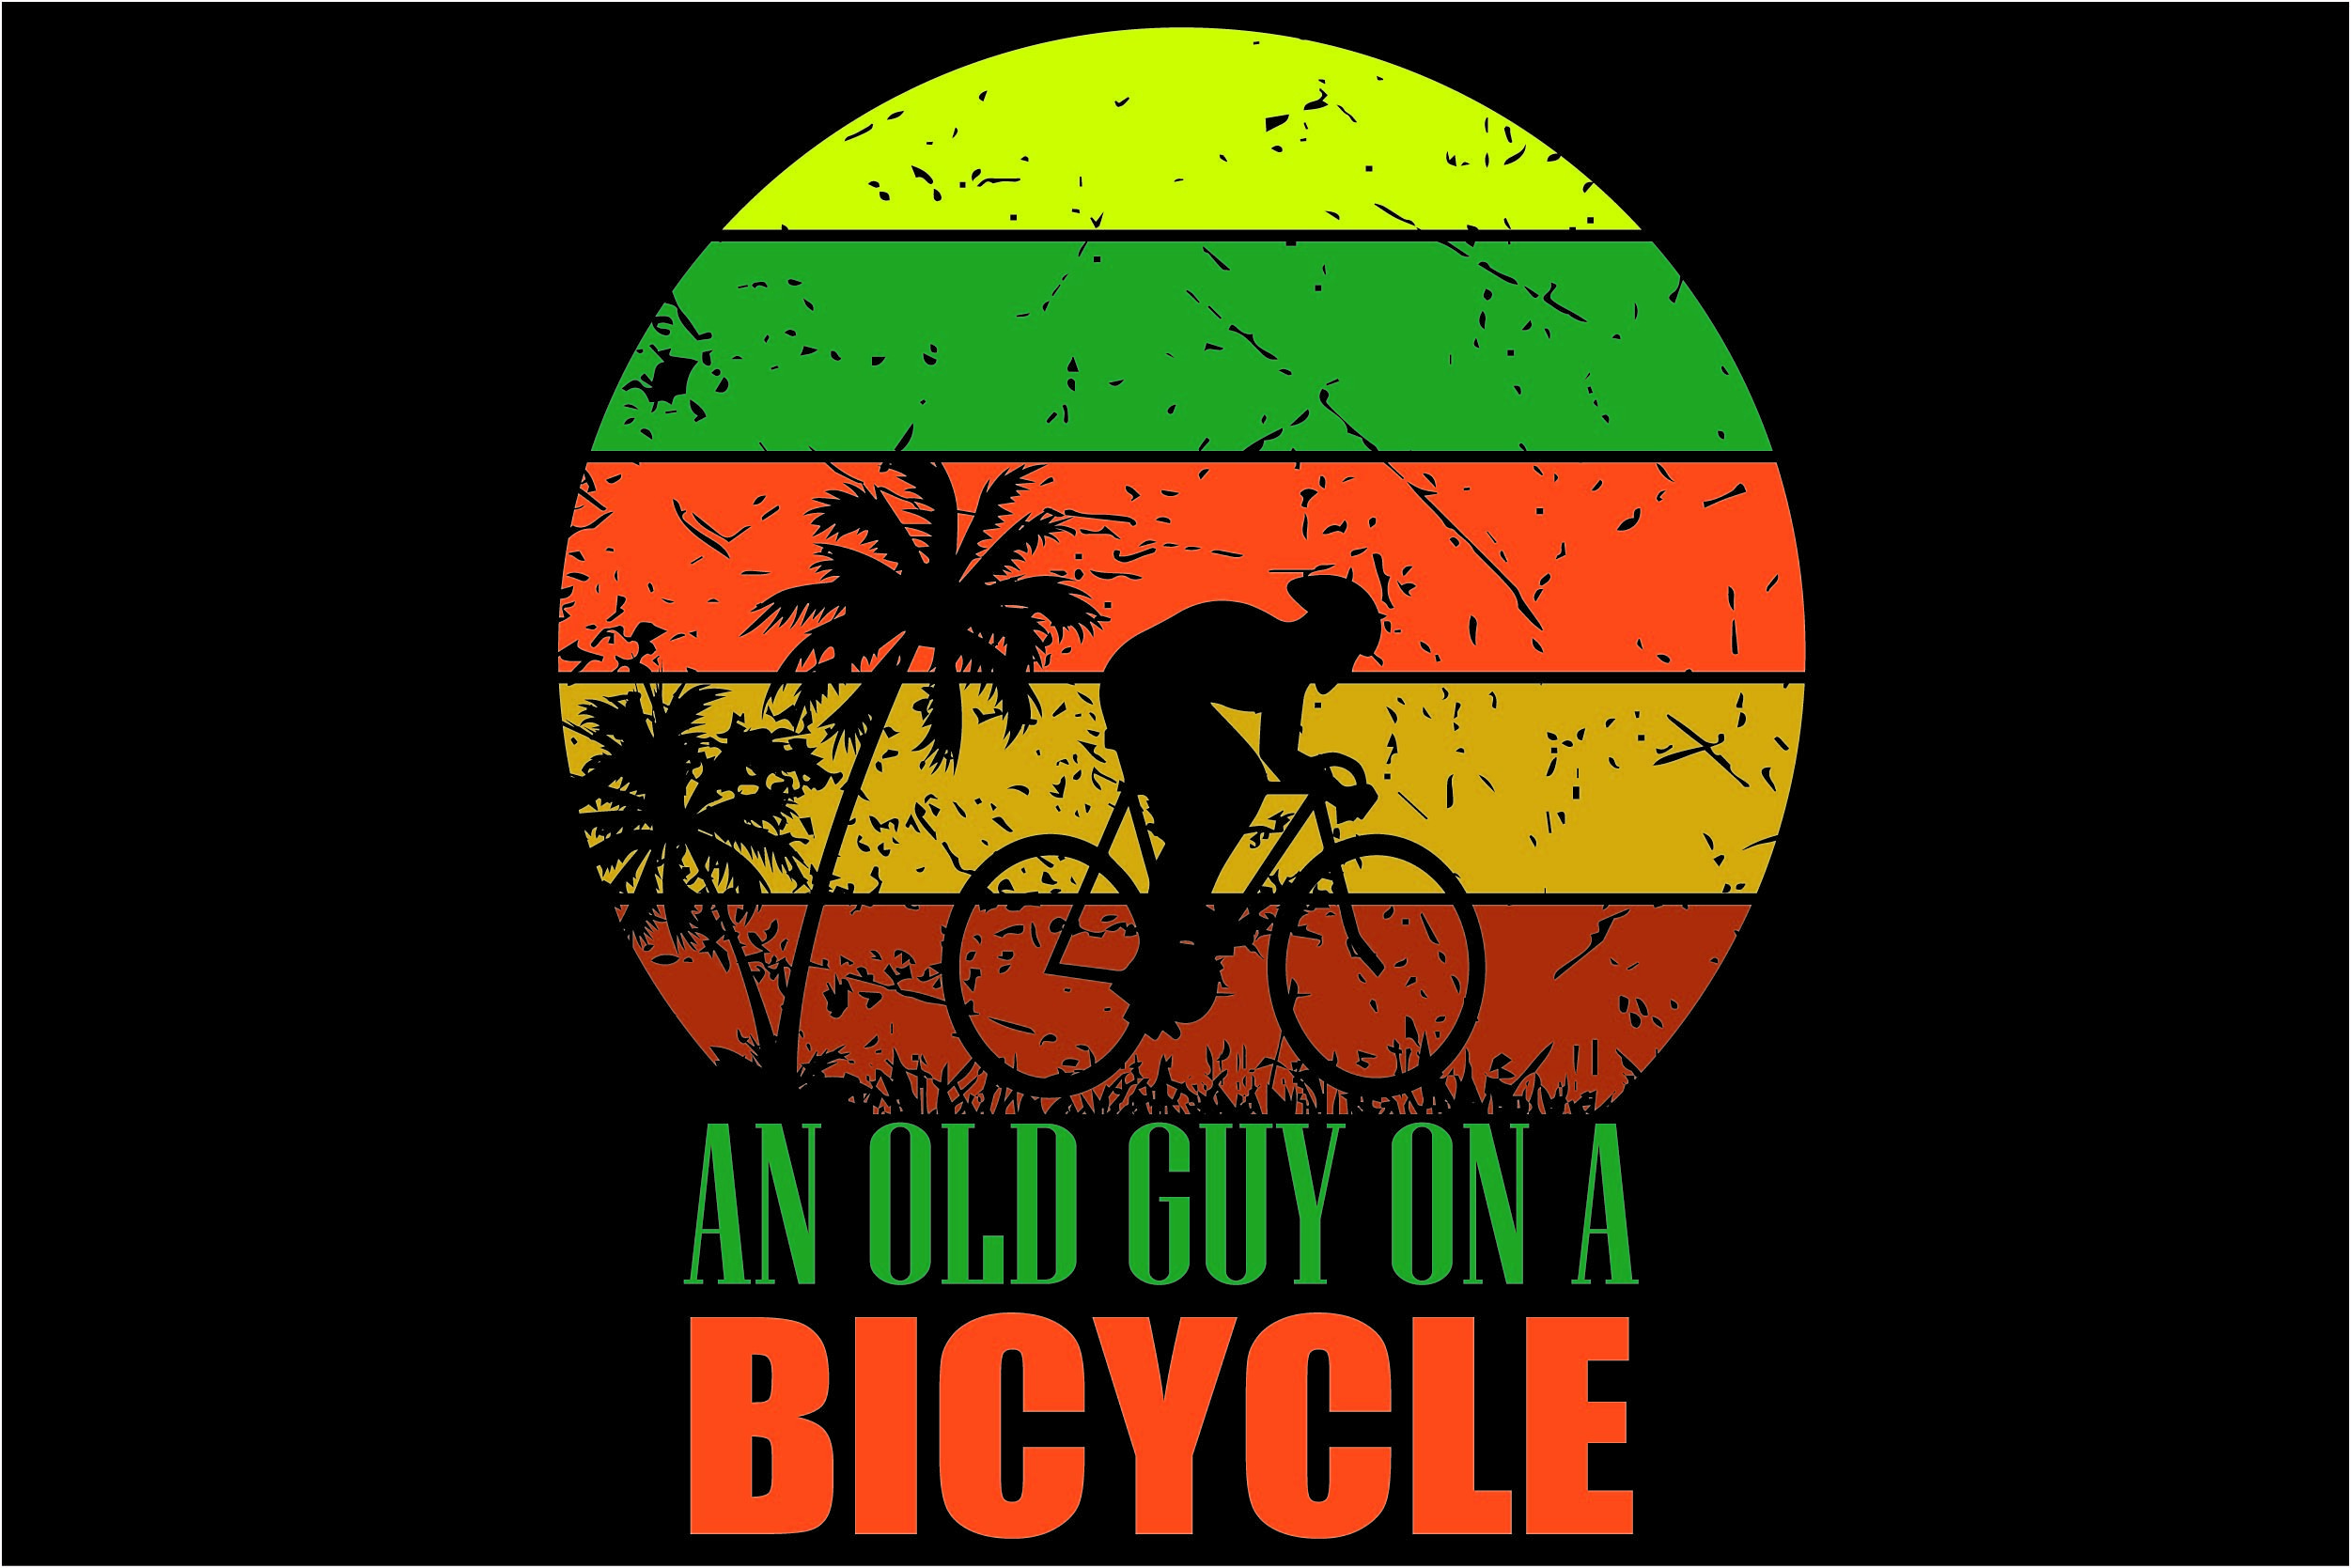 An OLD GUY on a BICYCLE Graphic by PixiMPerfect · Creative Fabrica